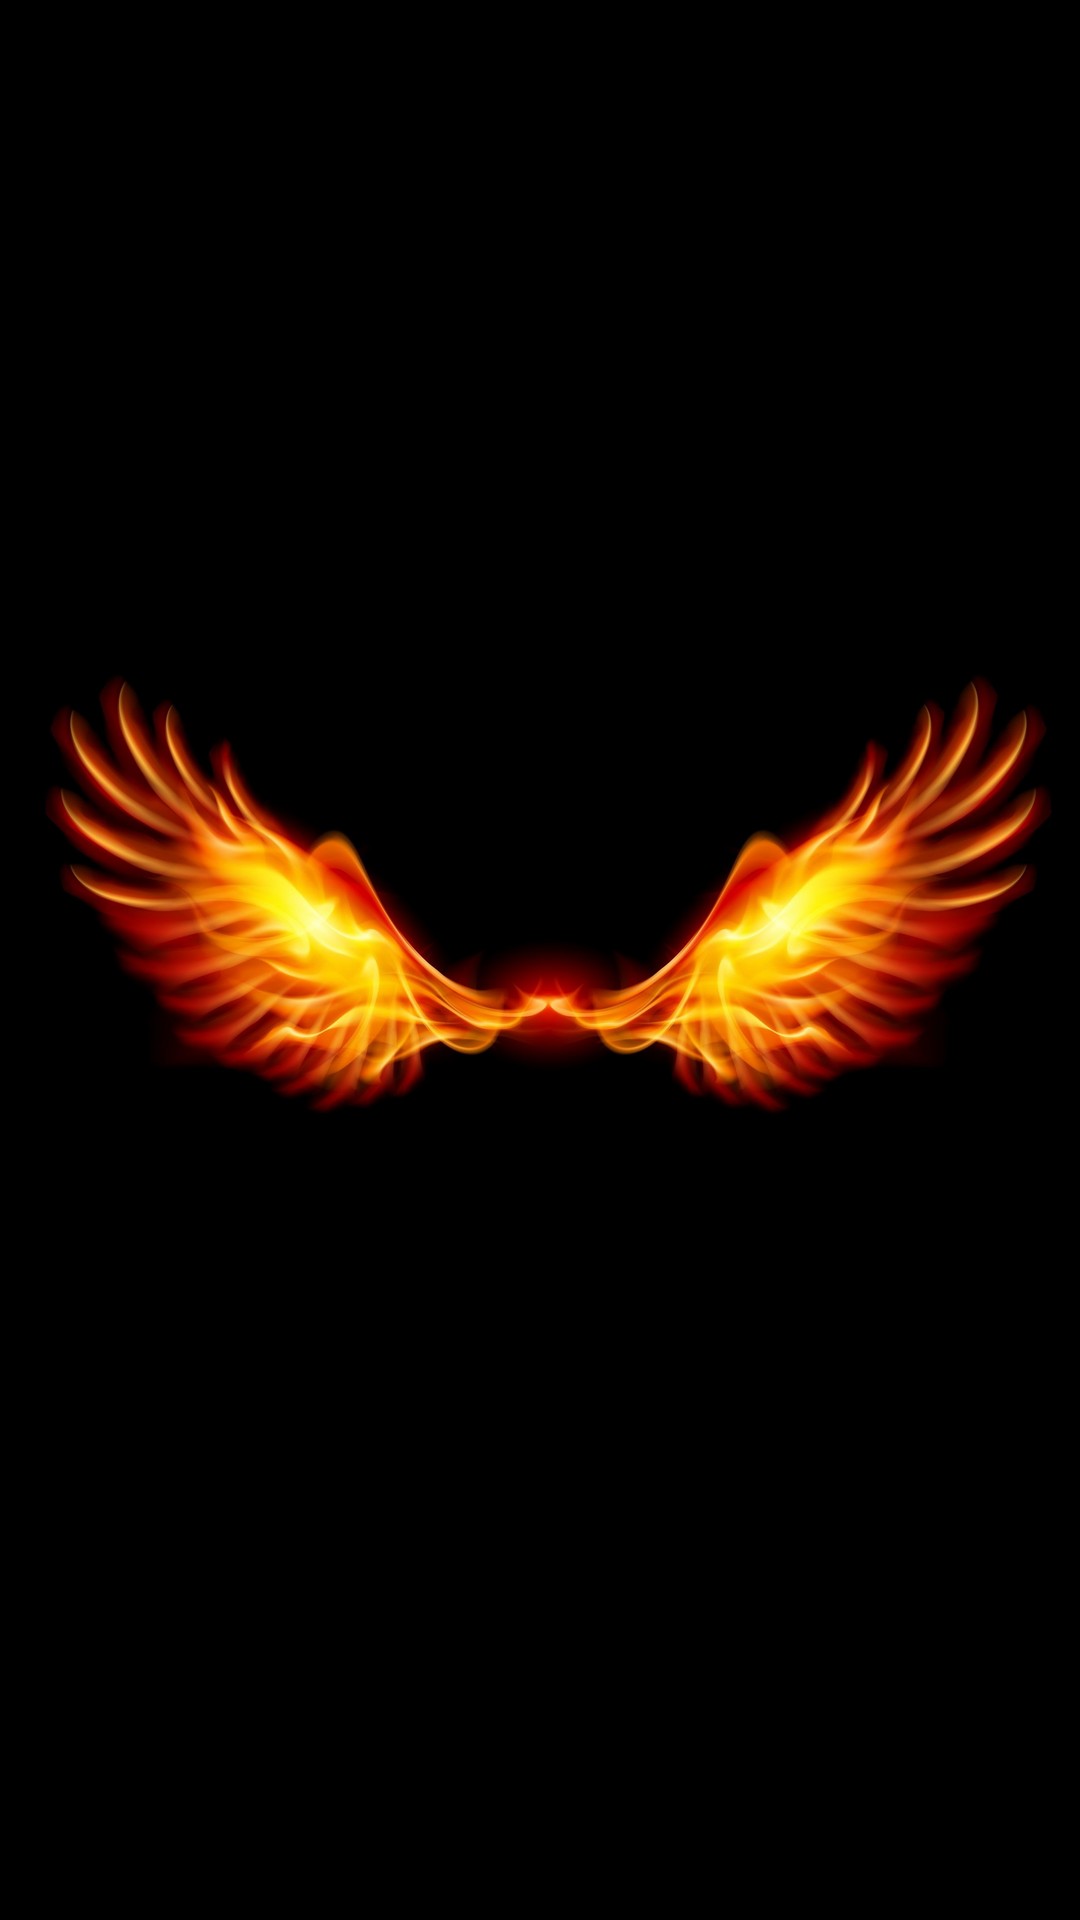 iPhone 7 Wallpaper Phoenix Images with image resolution 1080x1920 pixel. You can make this wallpaper for your iPhone 5, 6, 7, 8, X backgrounds, Mobile Screensaver, or iPad Lock Screen